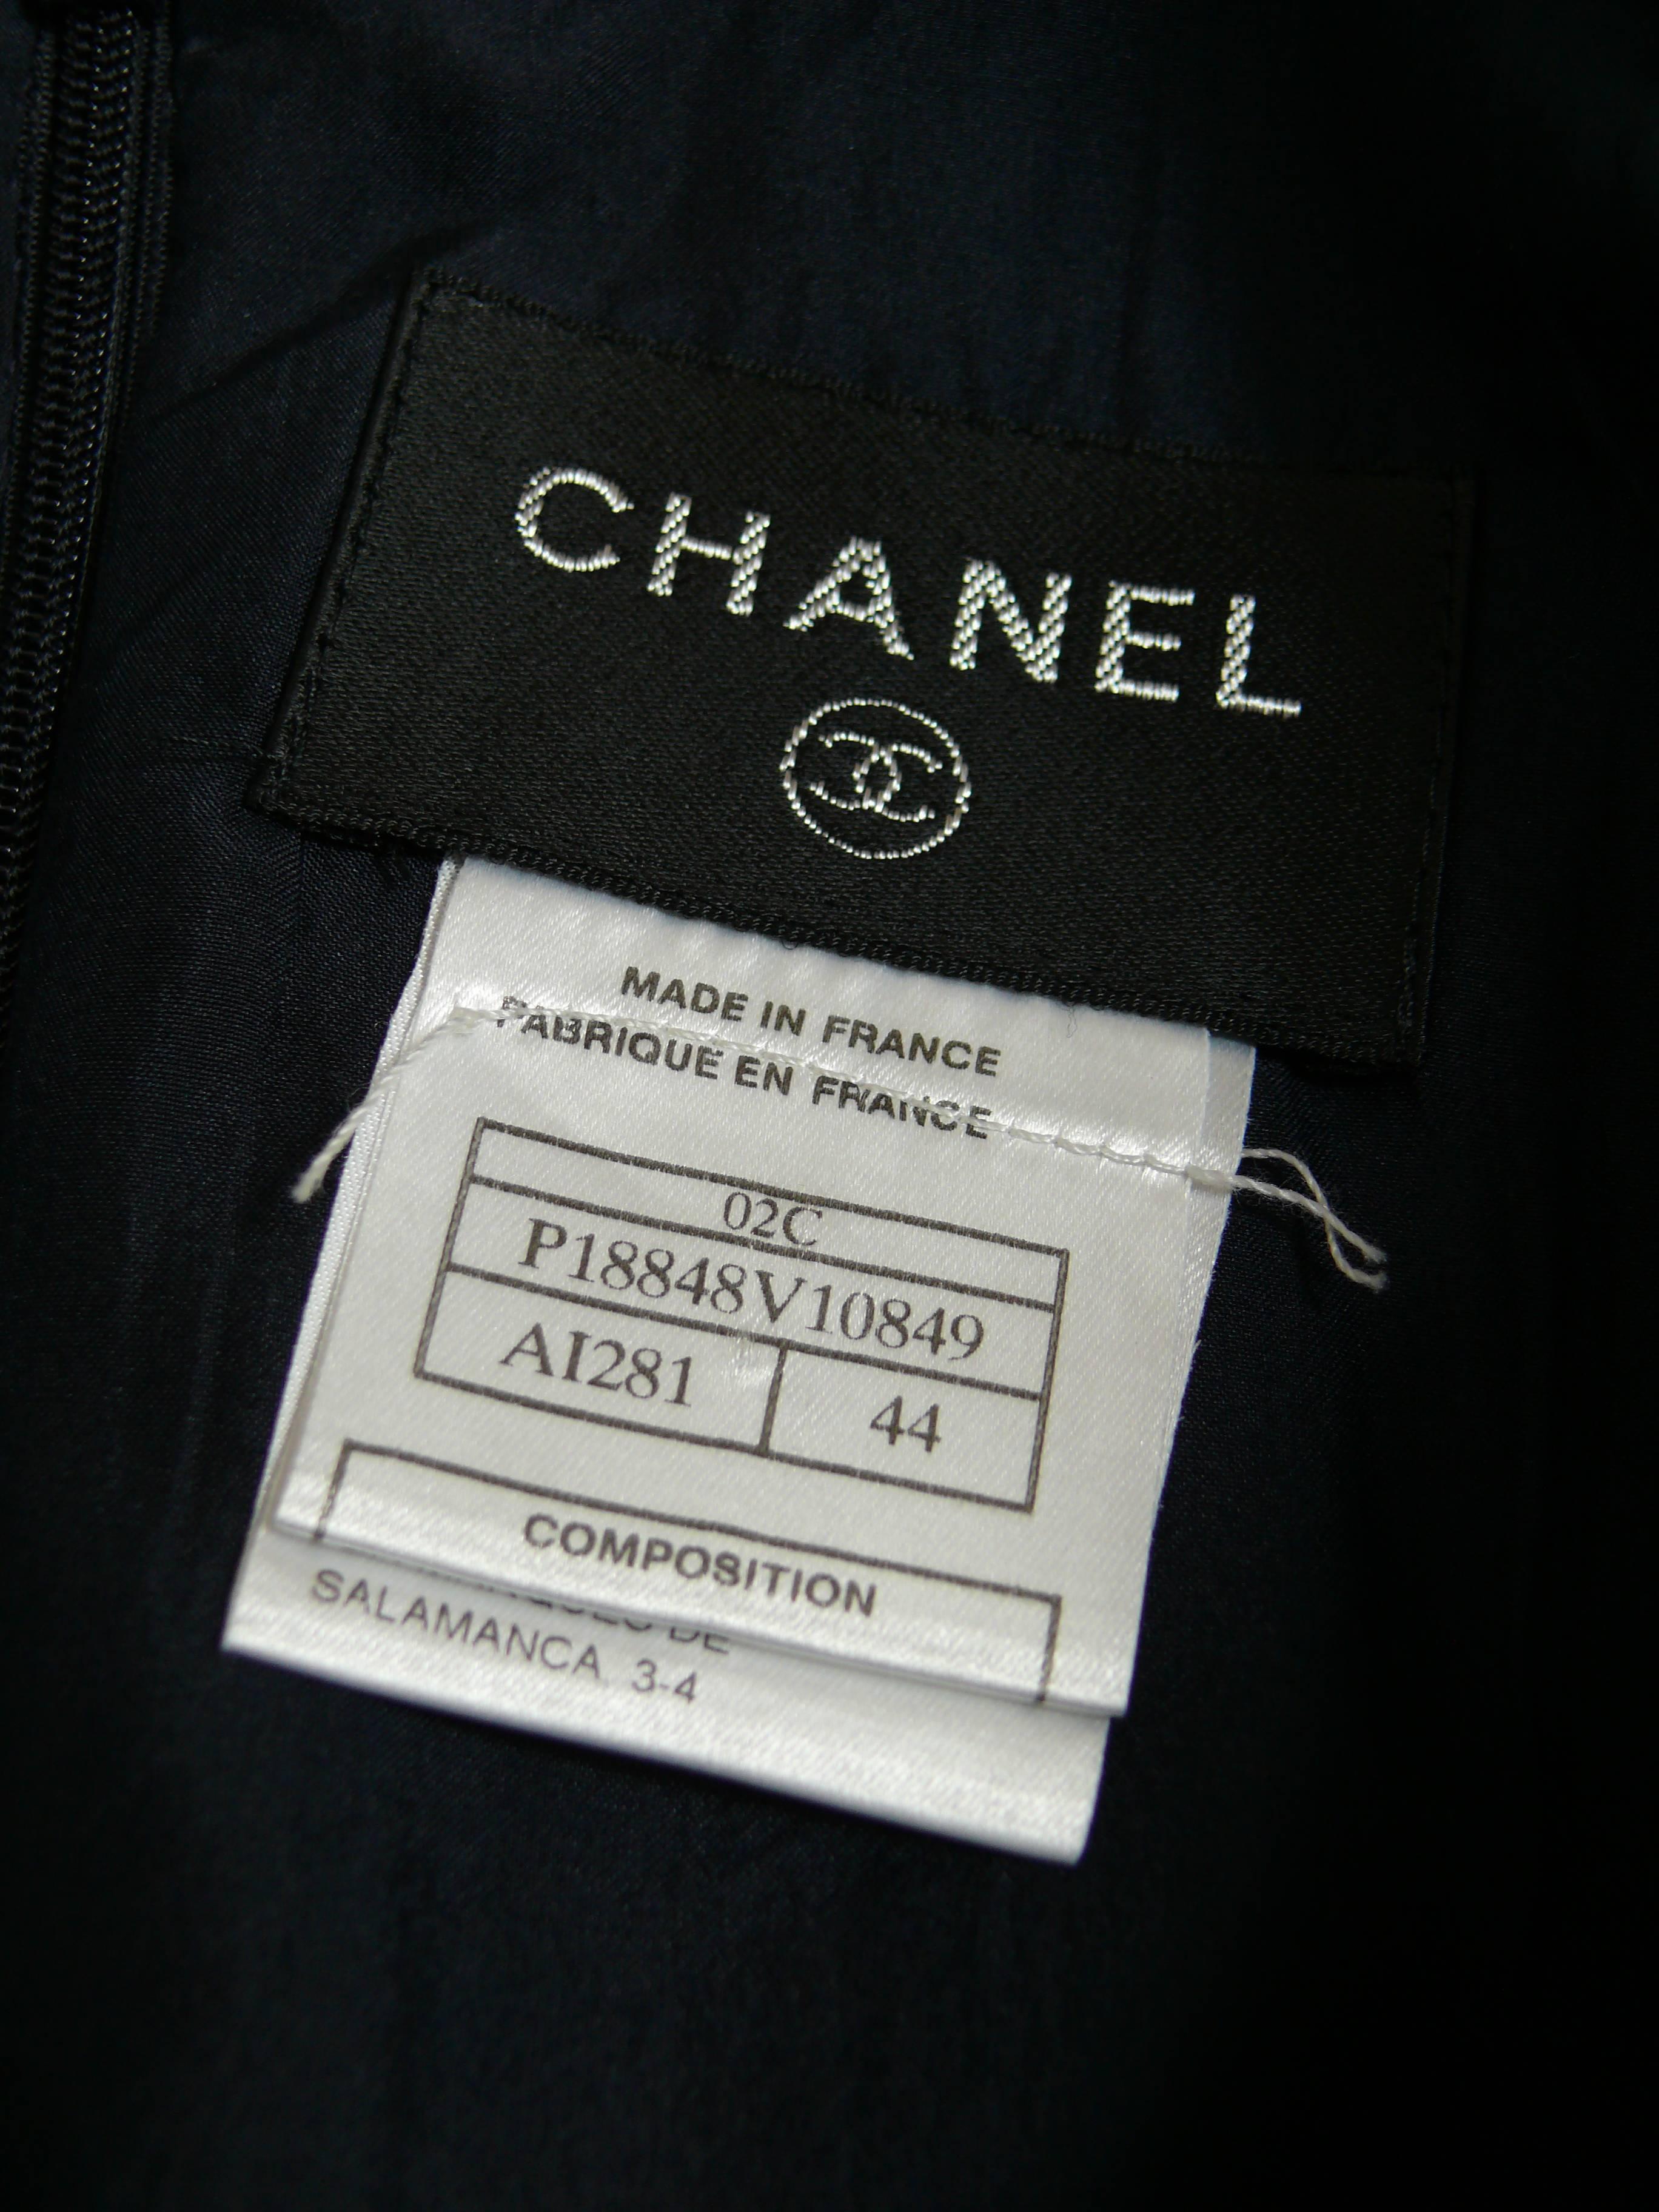 Chanel 2002 Cruise Collection Navy Asymmetric Dress In Good Condition For Sale In Nice, FR